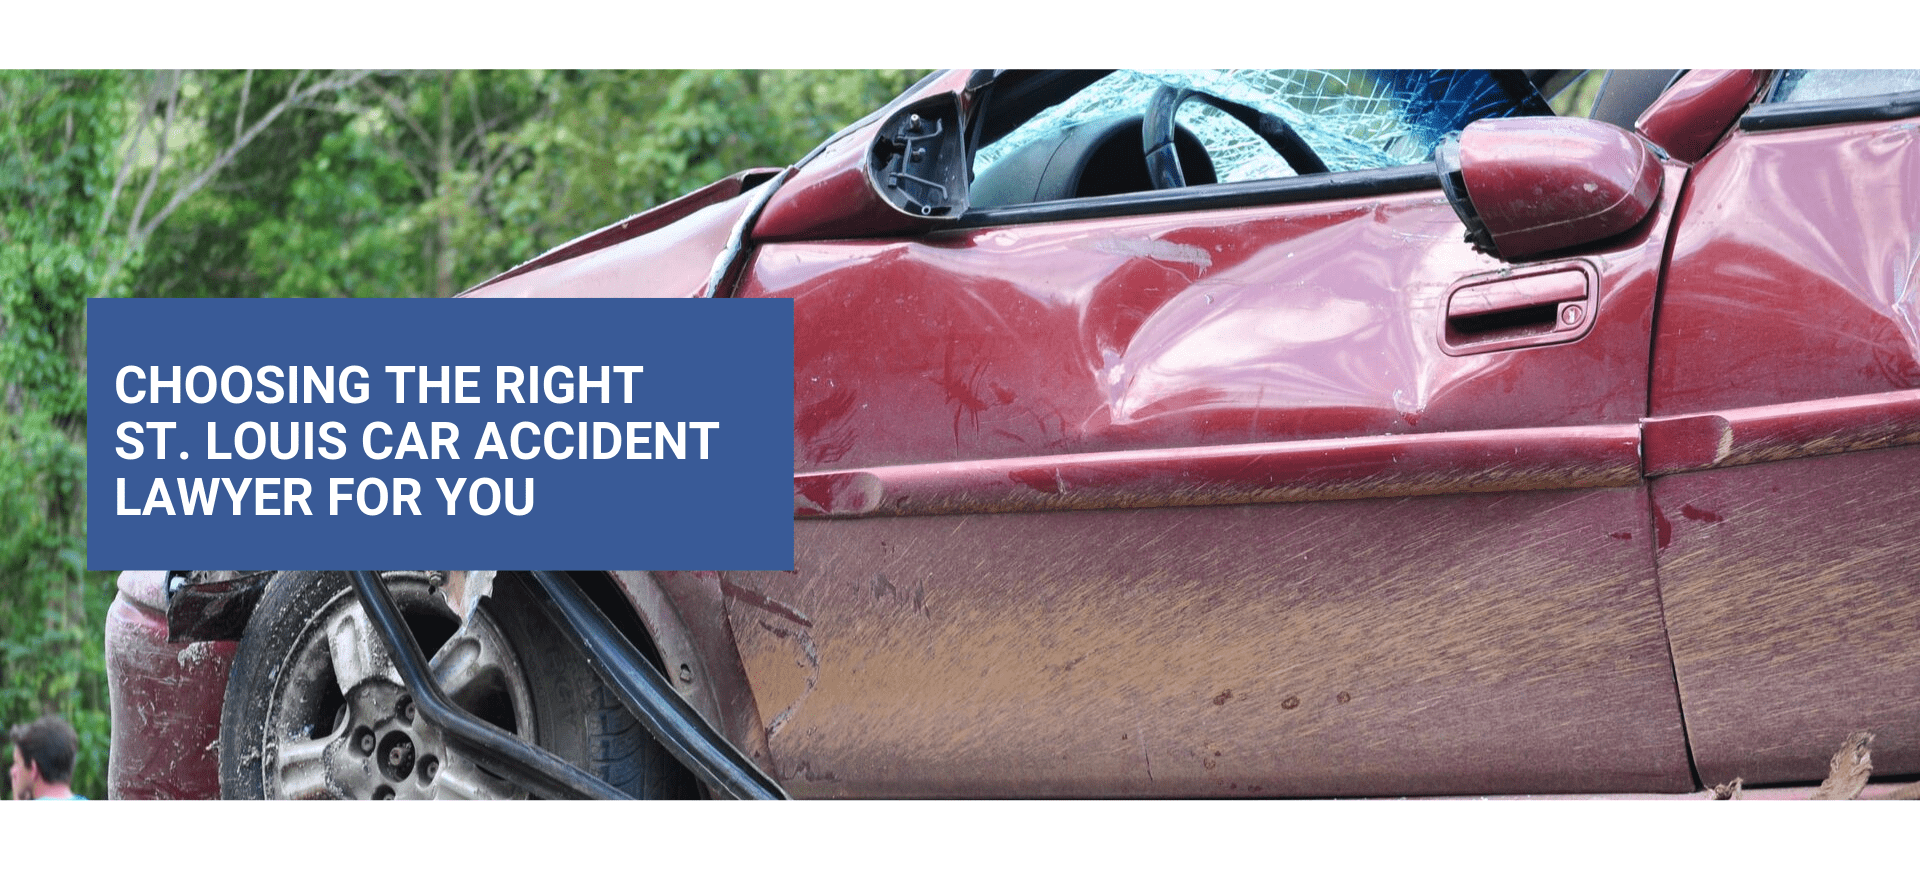 Choosing the Right St. Louis Car Accident Lawyer for You